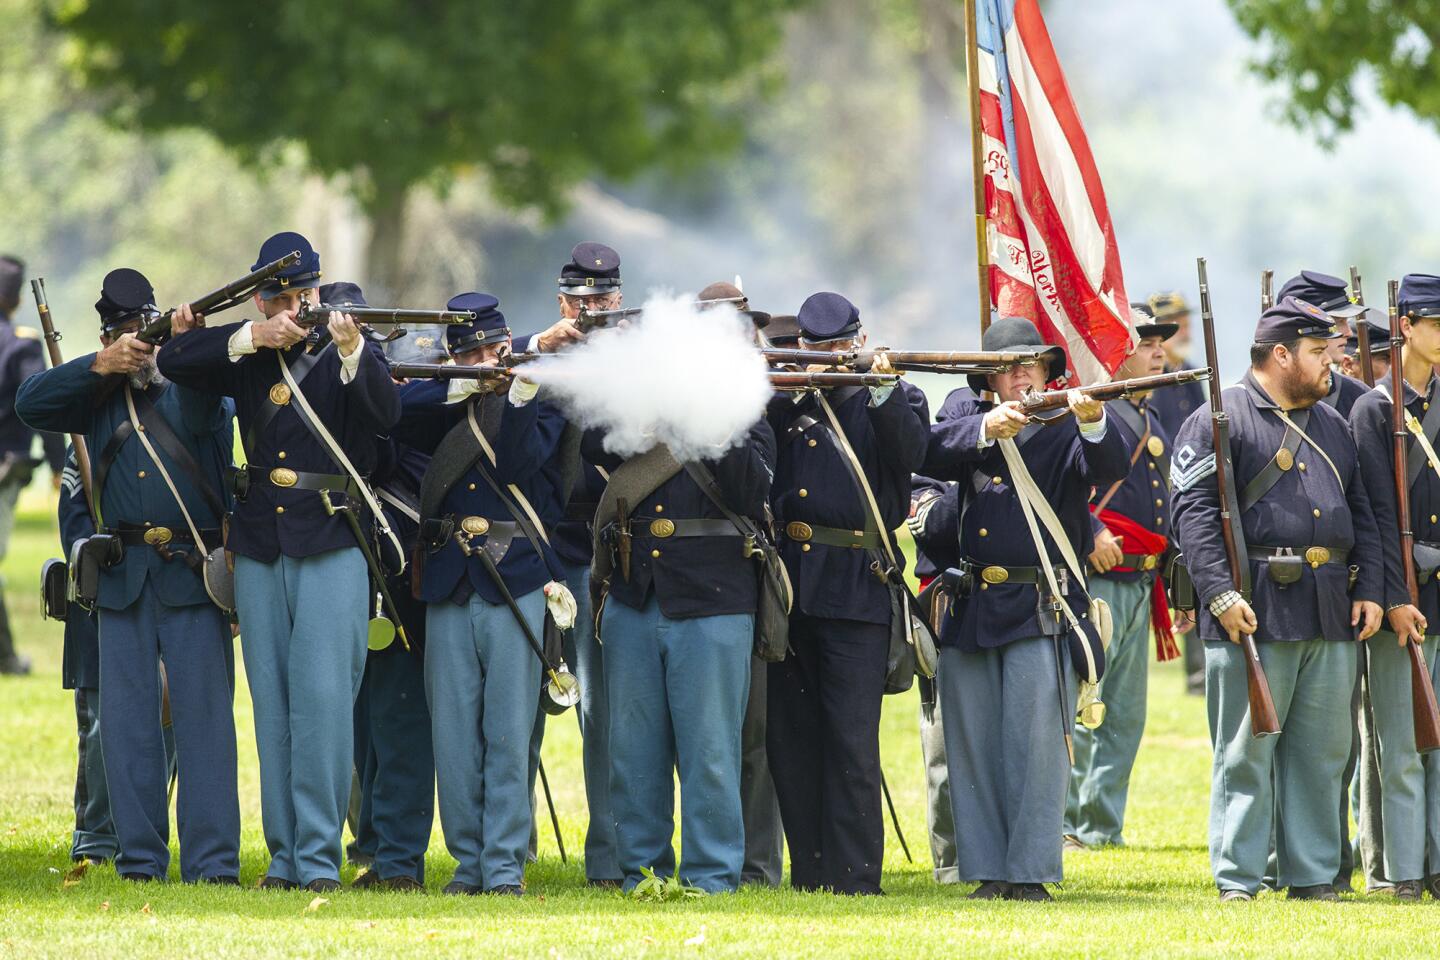 Union army soldiers open fire during the 24th annual Civil War Days "living history" event in Huntington Beach's Central Park on Saturday.